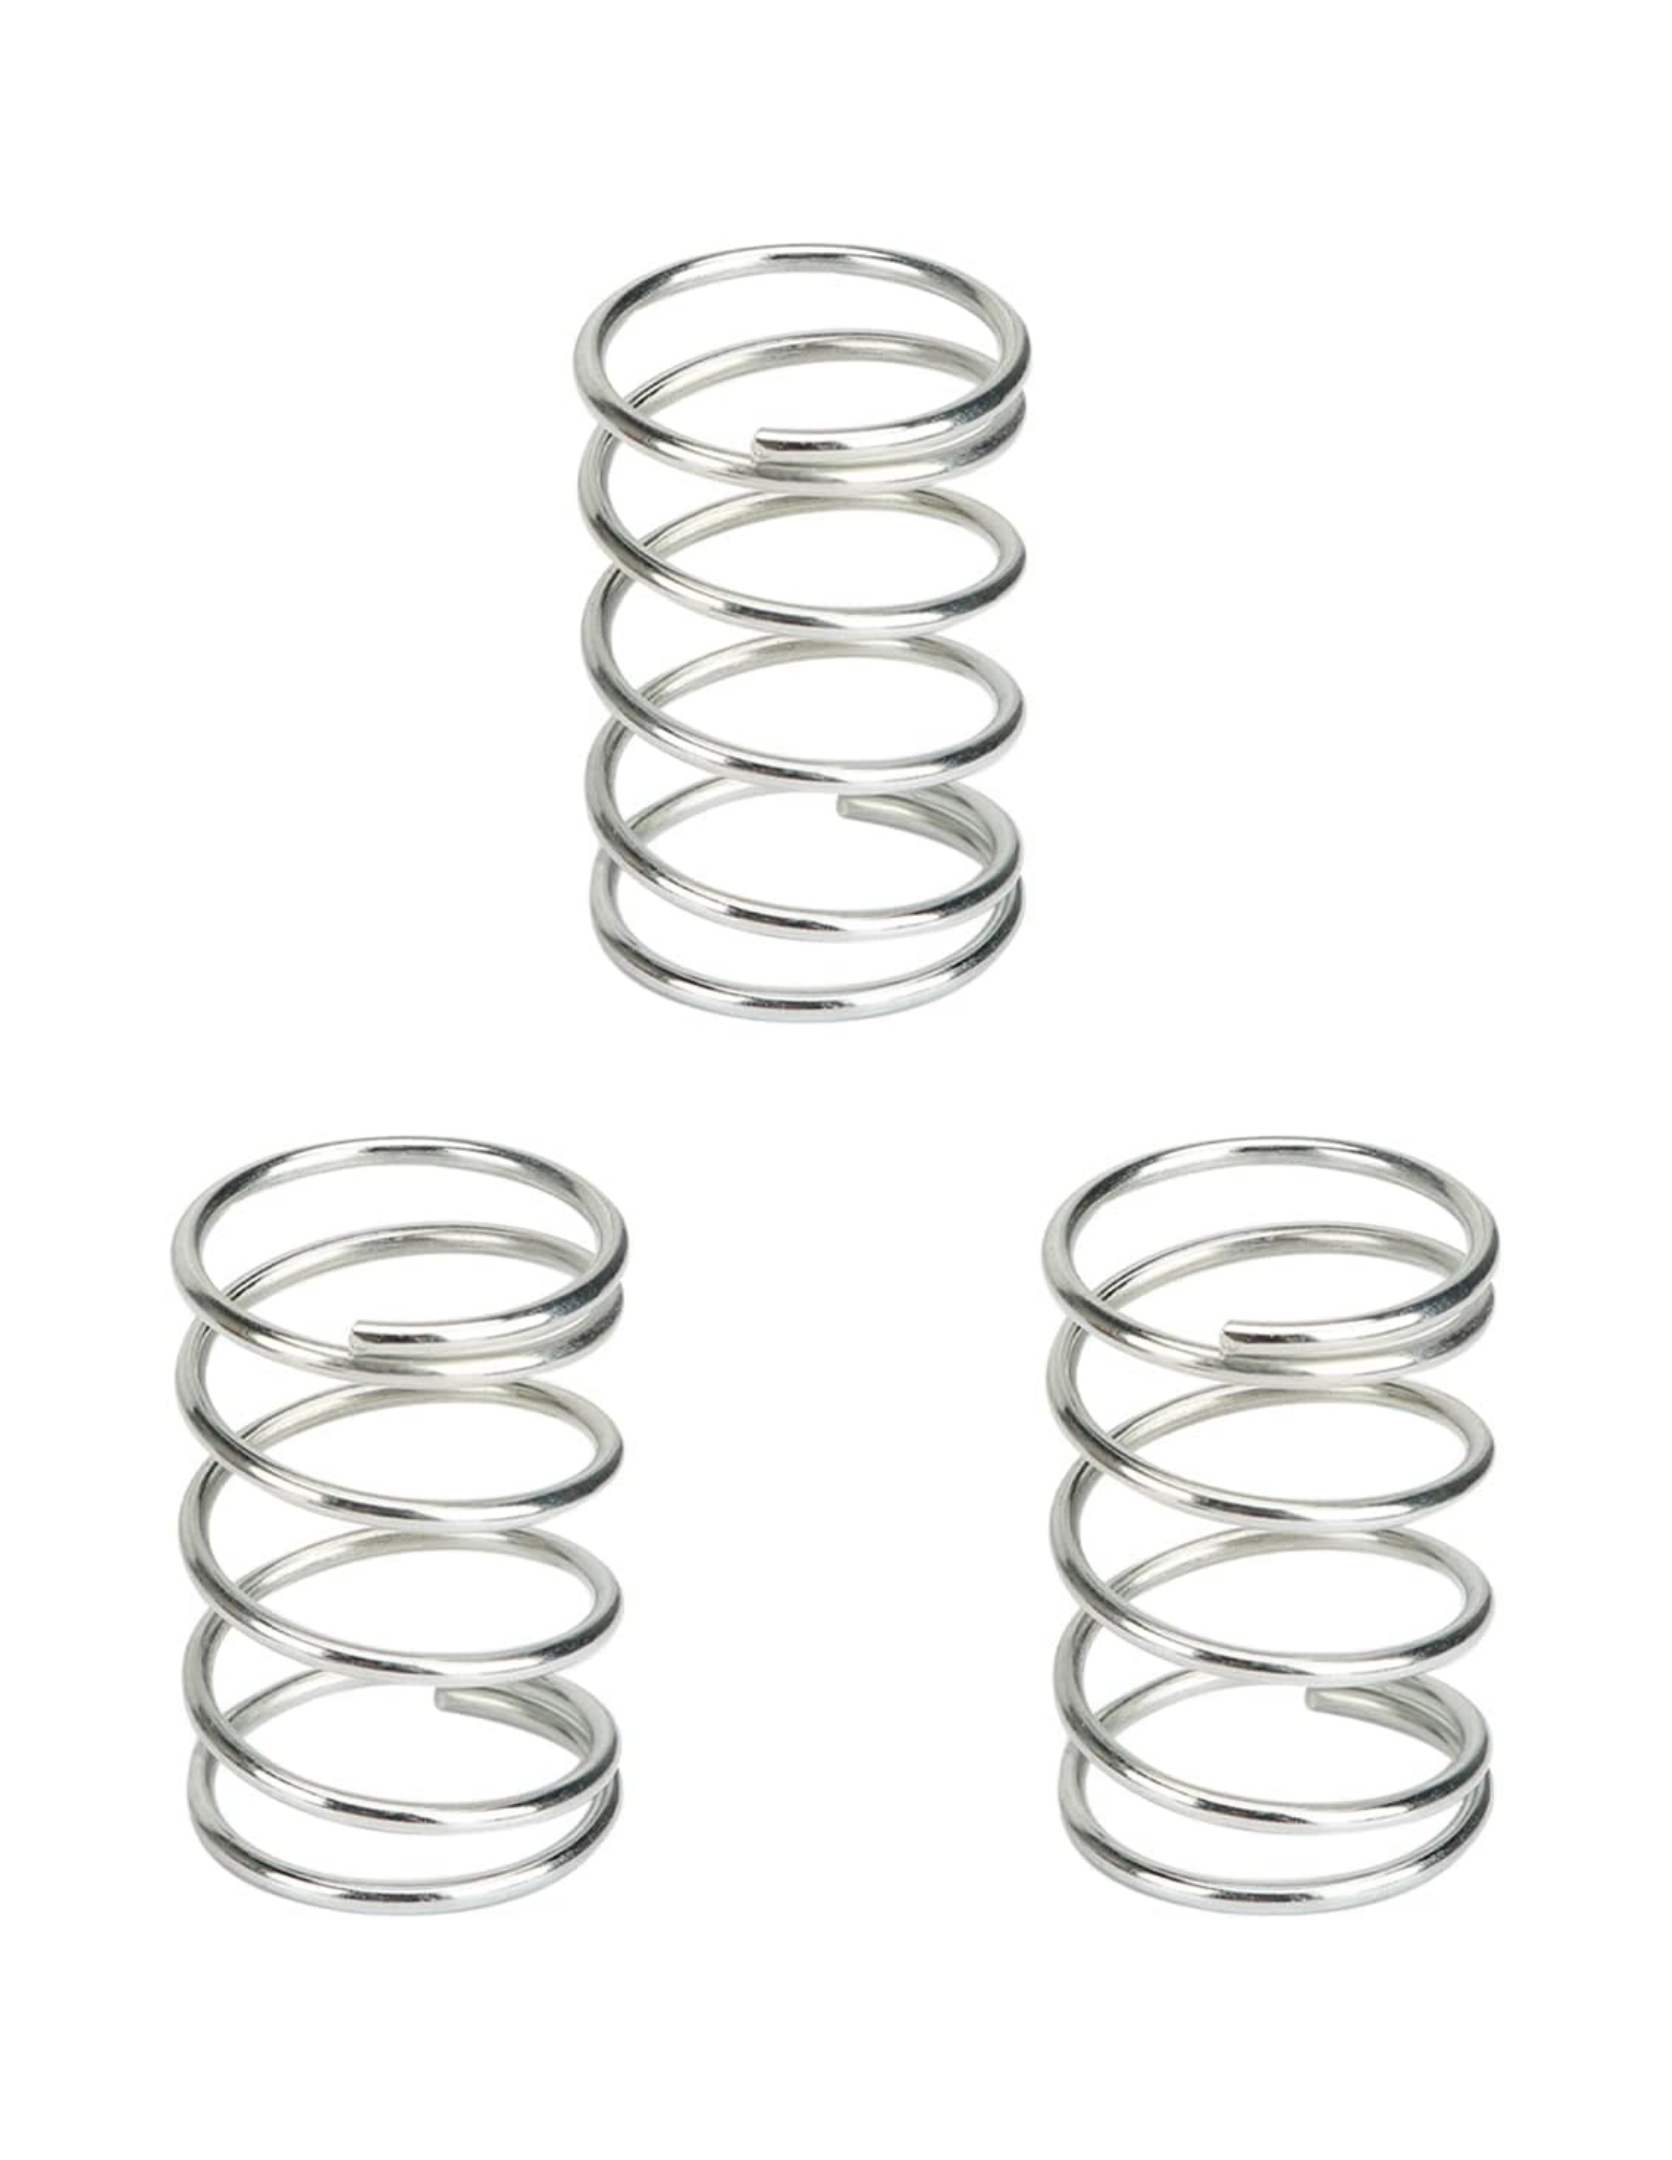 THTEN DWO1DT995 Replacement Spring Compatible with Dewalt DCST970,DCST922,DCST990,DCST920,DCST925,DCST991 Cordless String Trimmer,3 Pack